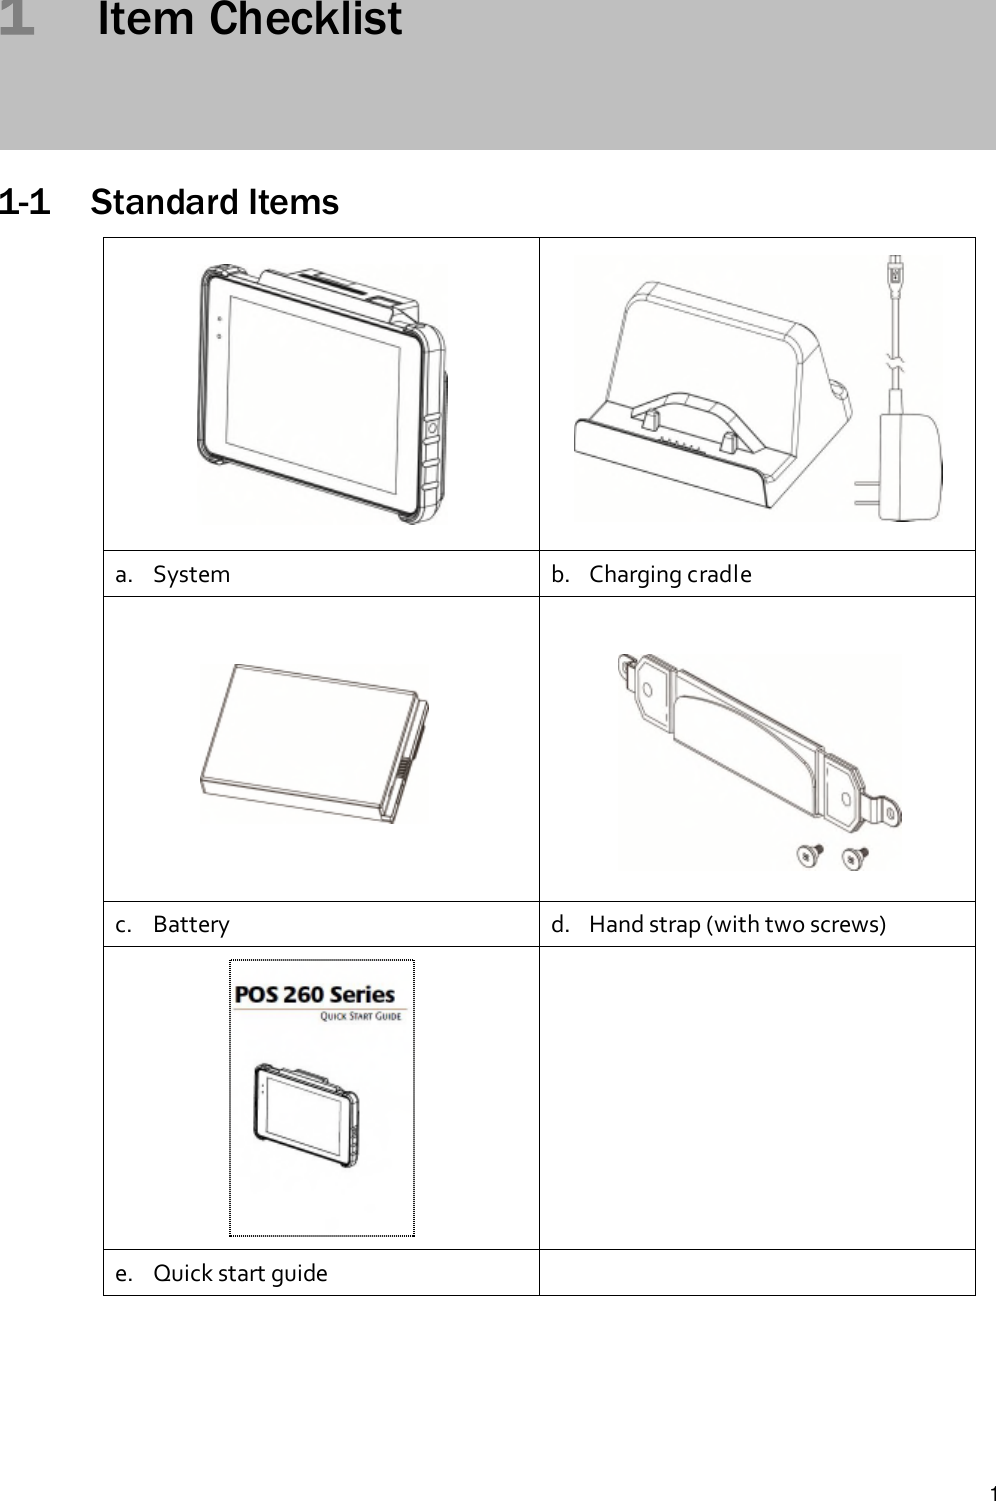 11Item Checklist1-1 Standard Itemsa. System b. Charging cradlec. Battery d. Hand strap (with two screws)e. Quick start guide